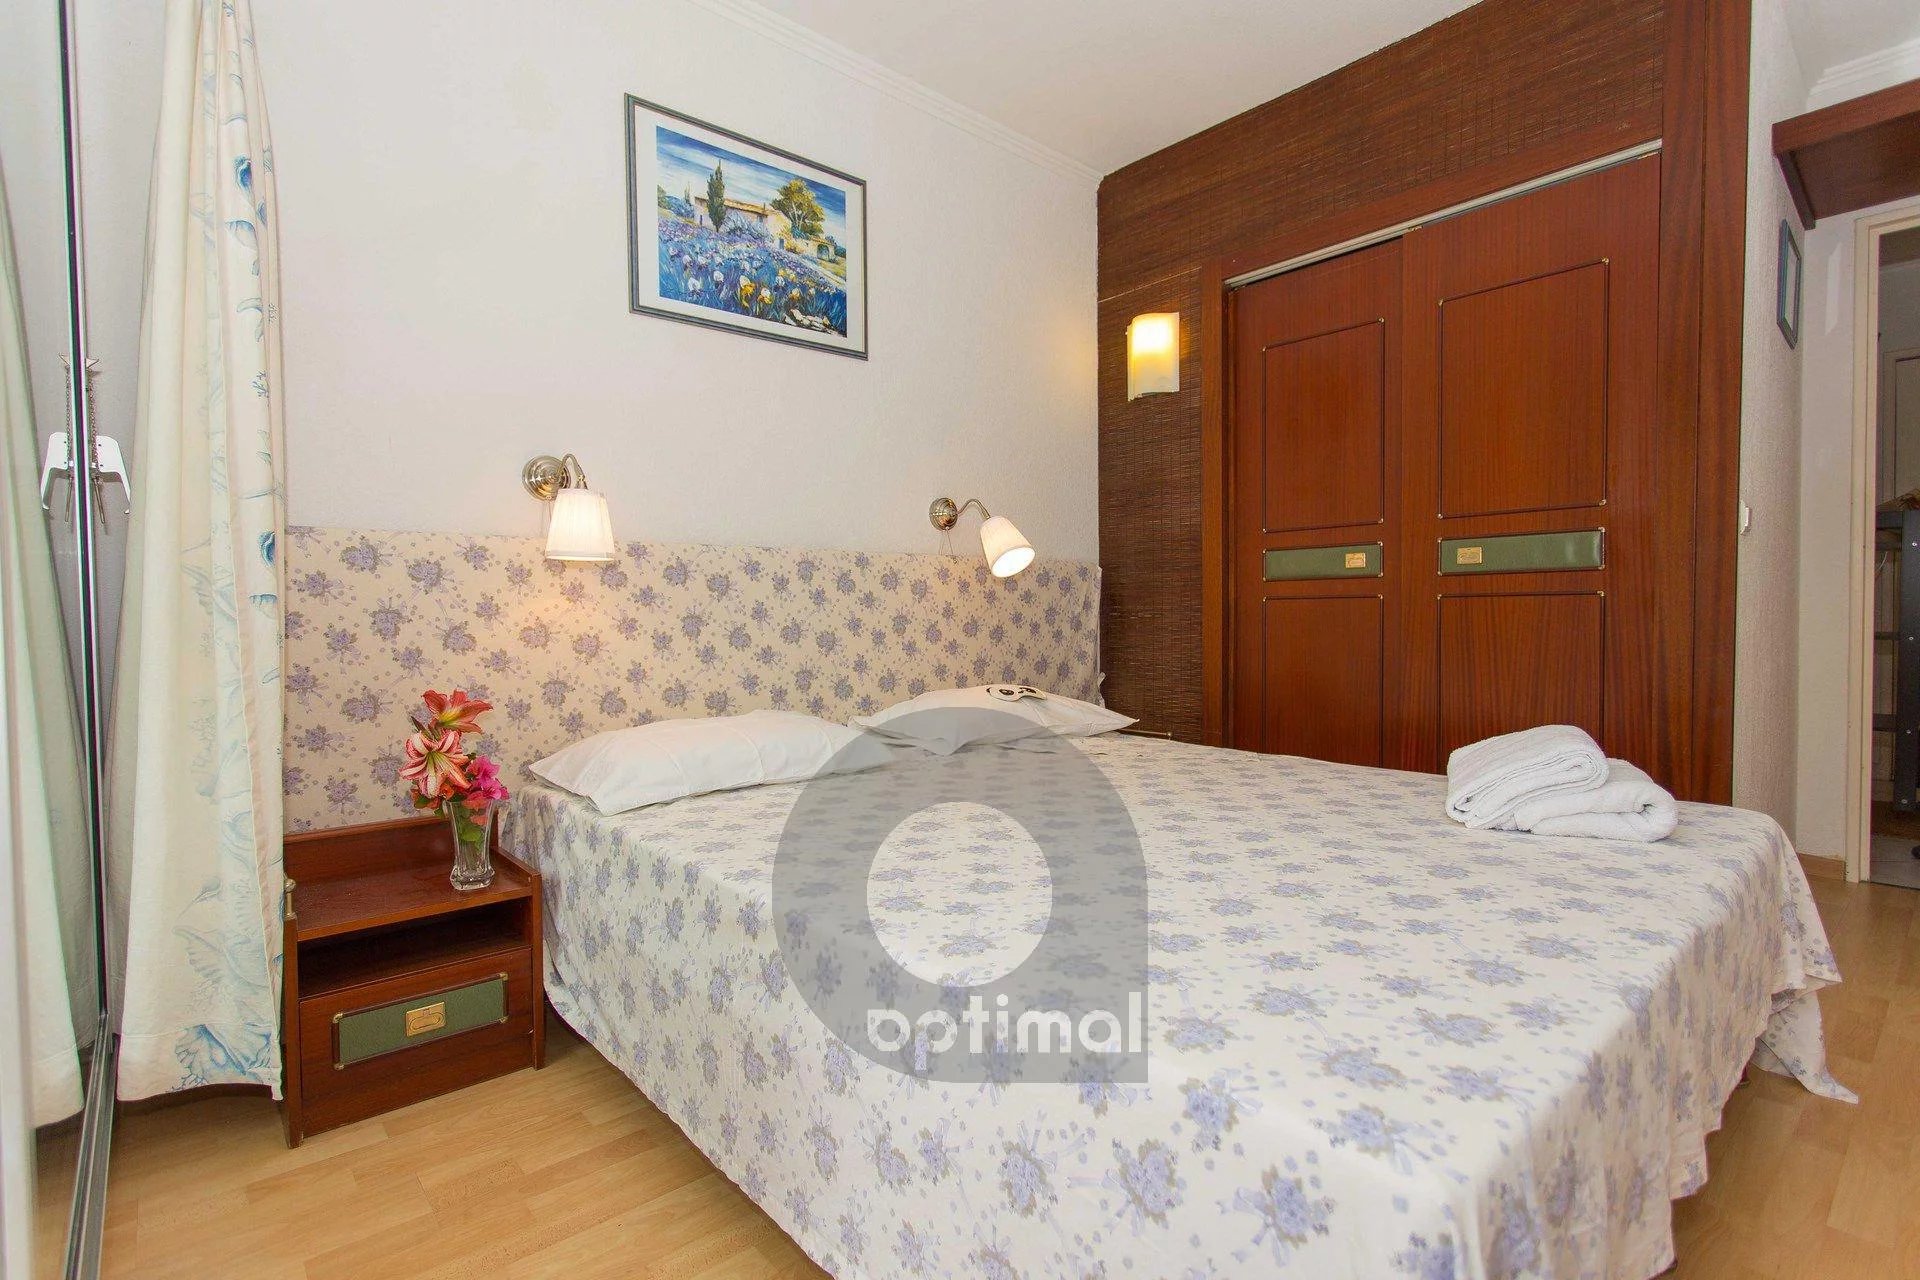 Quiet 2 rooms with terrace, garden, private parking and swiming pool